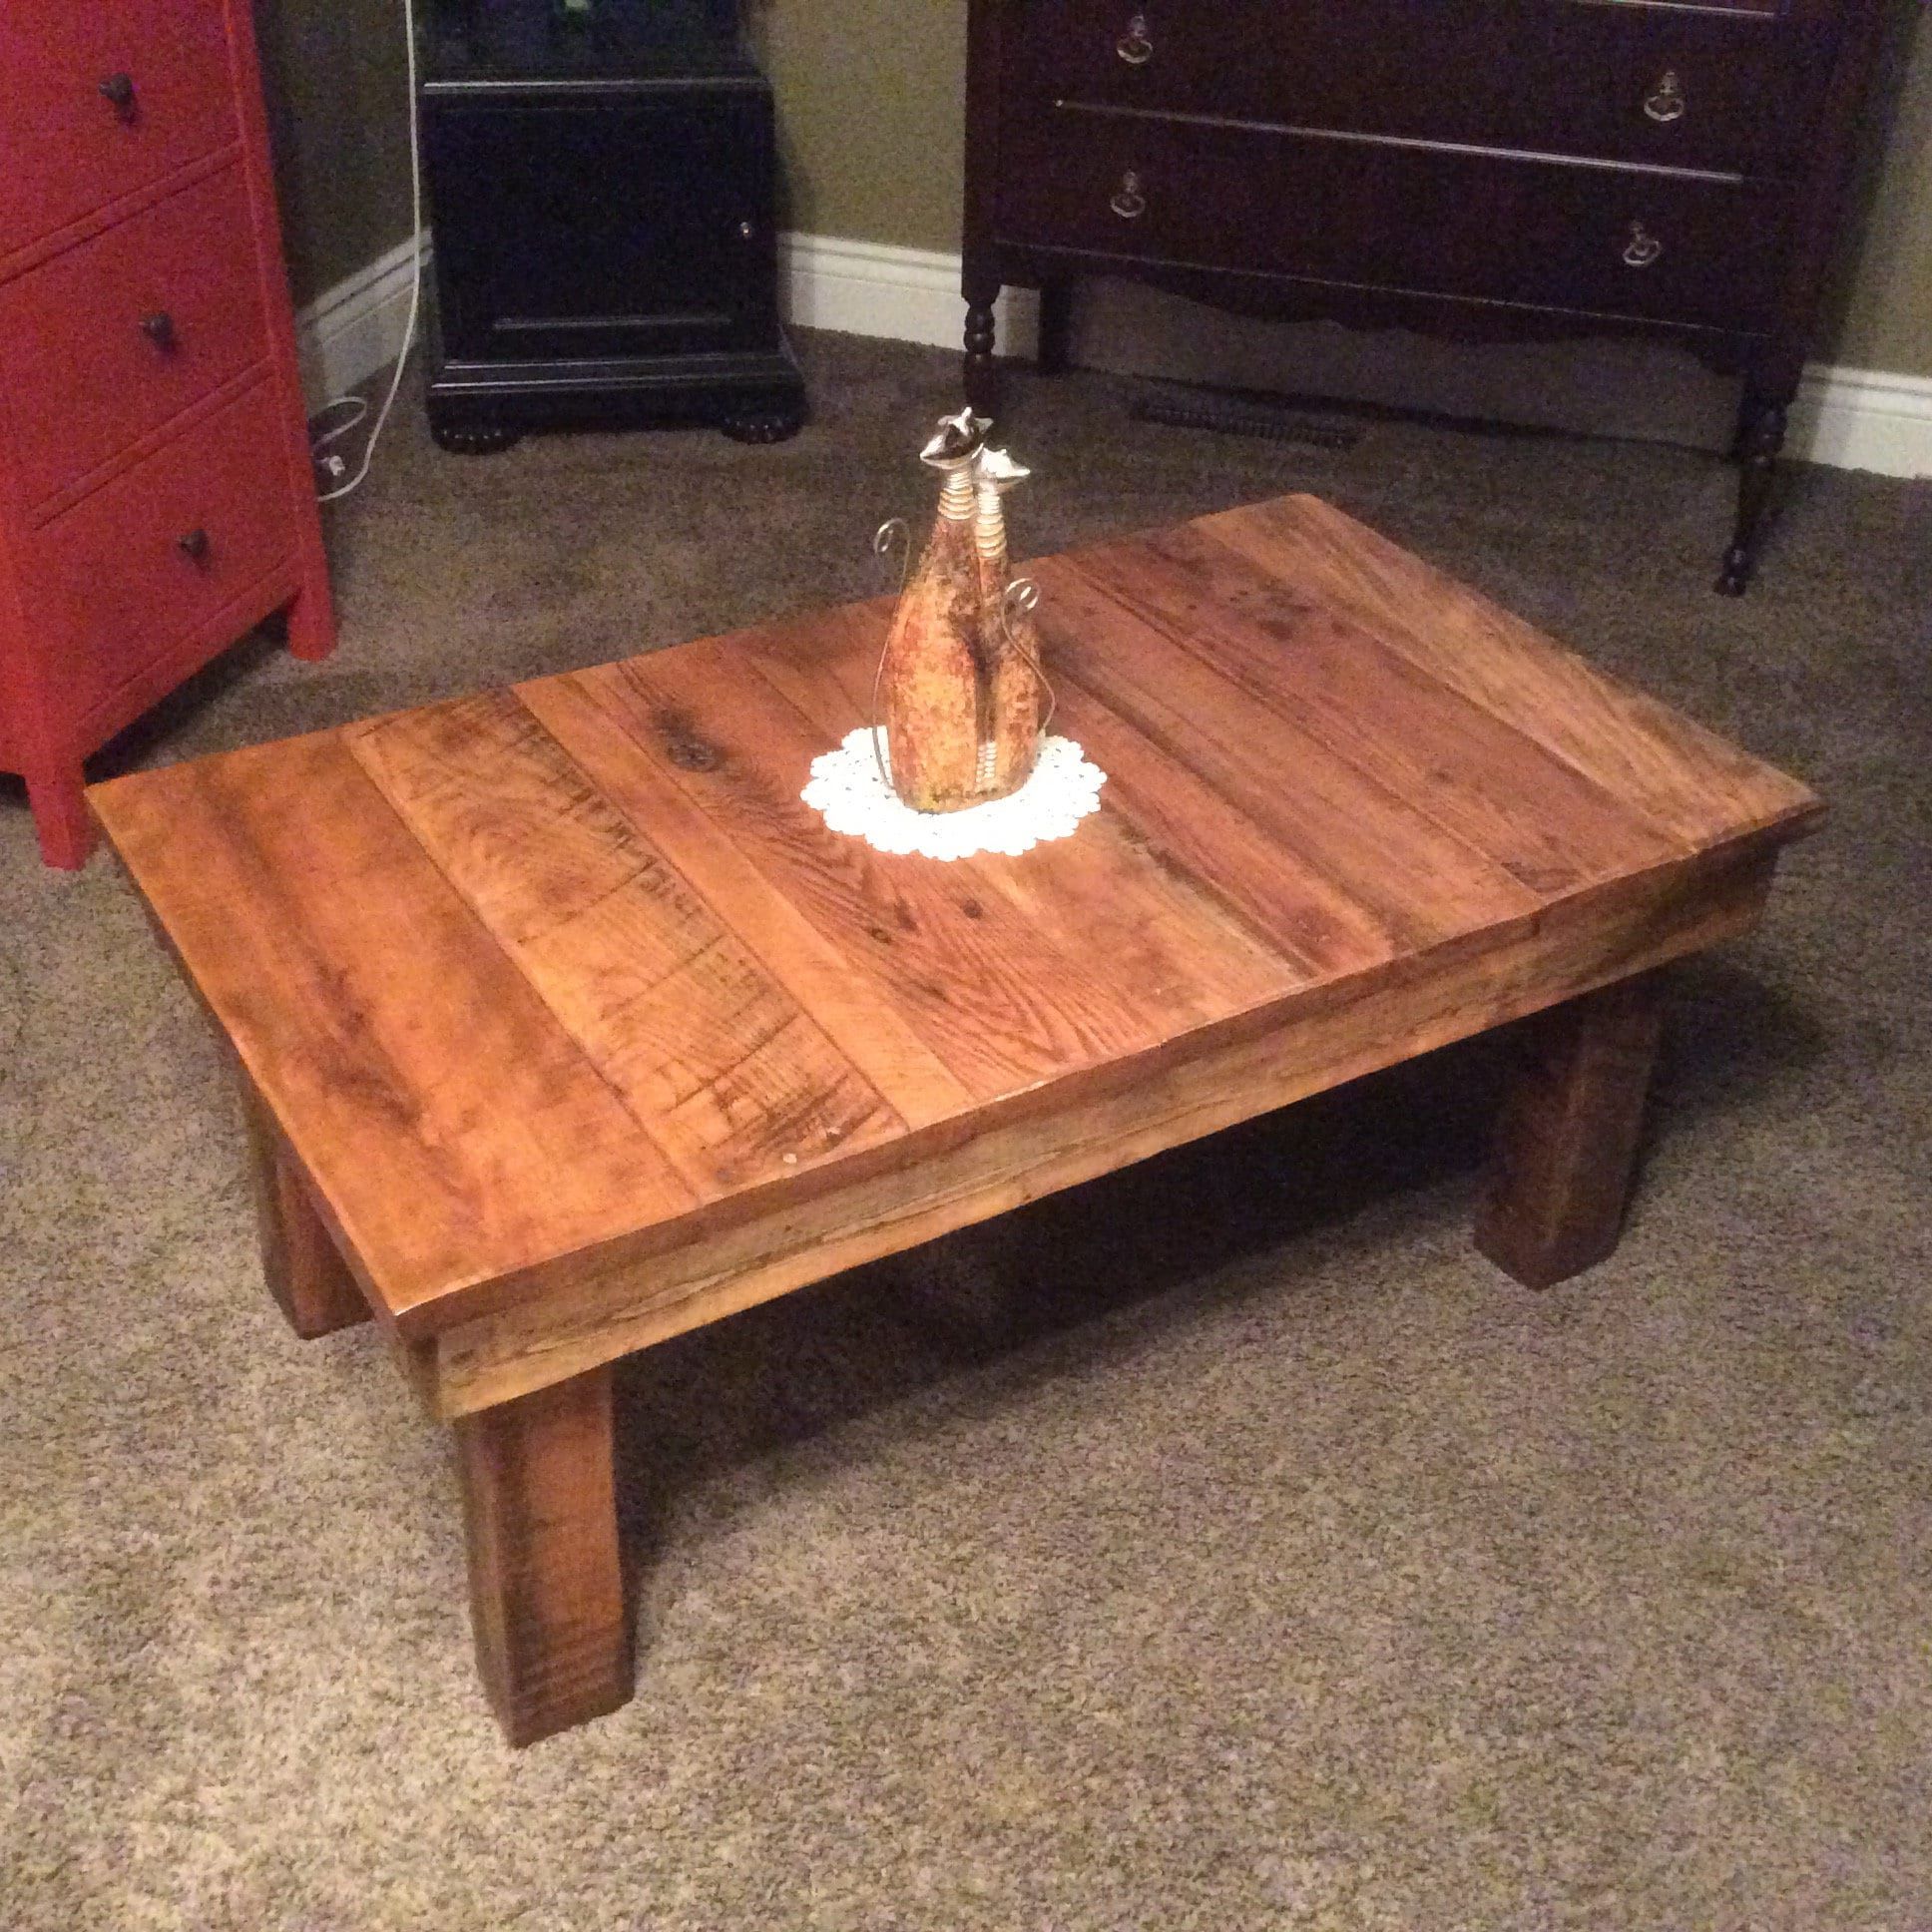 Reclaimed Wood Rustic Coffee Table With Most Recently Released Barnwood Coffee Tables (View 3 of 20)